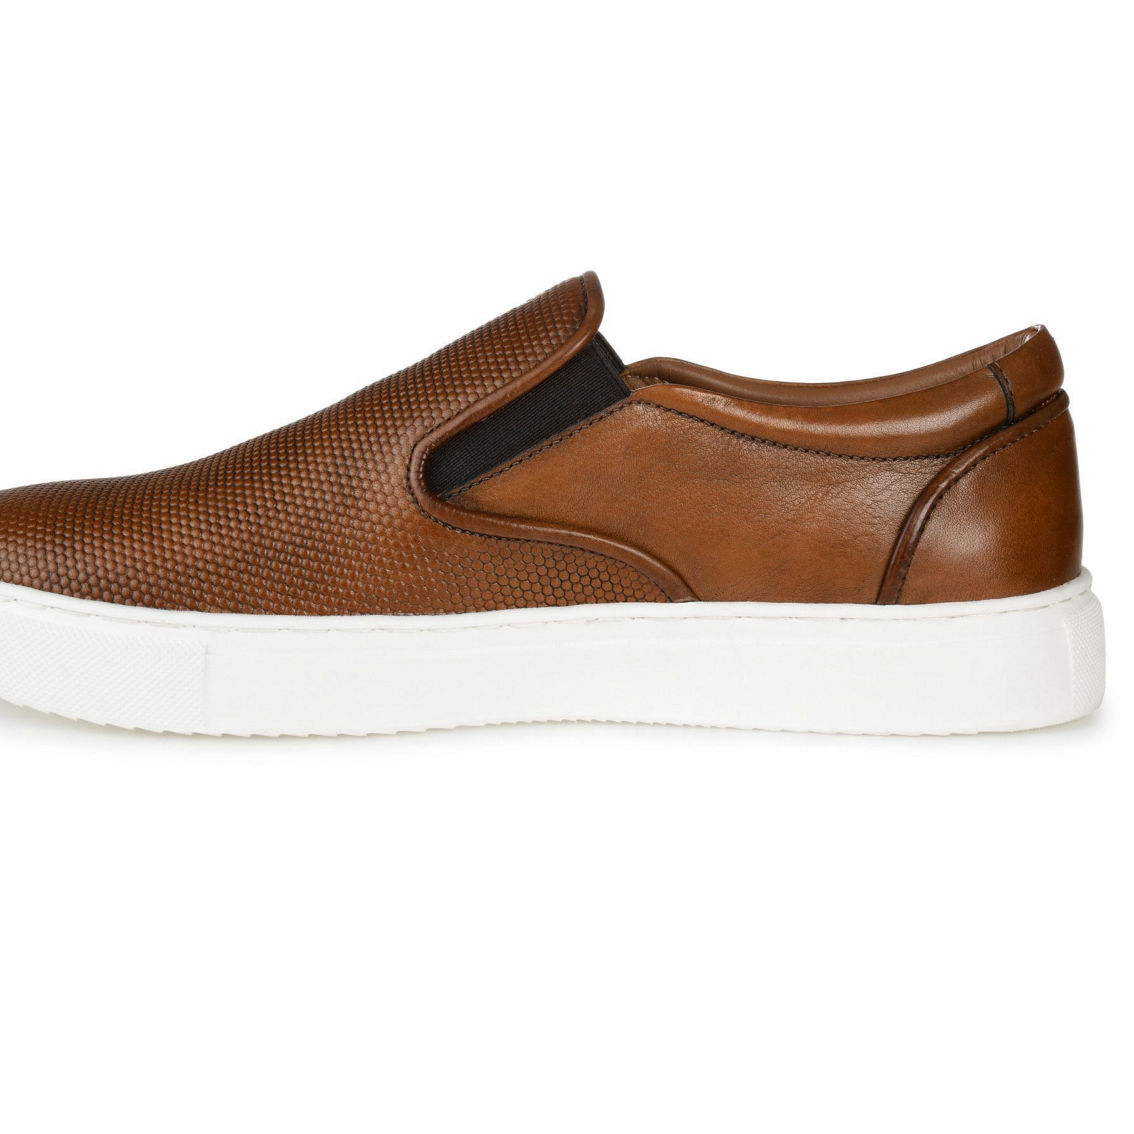 Thomas & Vine Conley Slip-on Leather Sneaker | Sneakers | Shoes | Shop ...